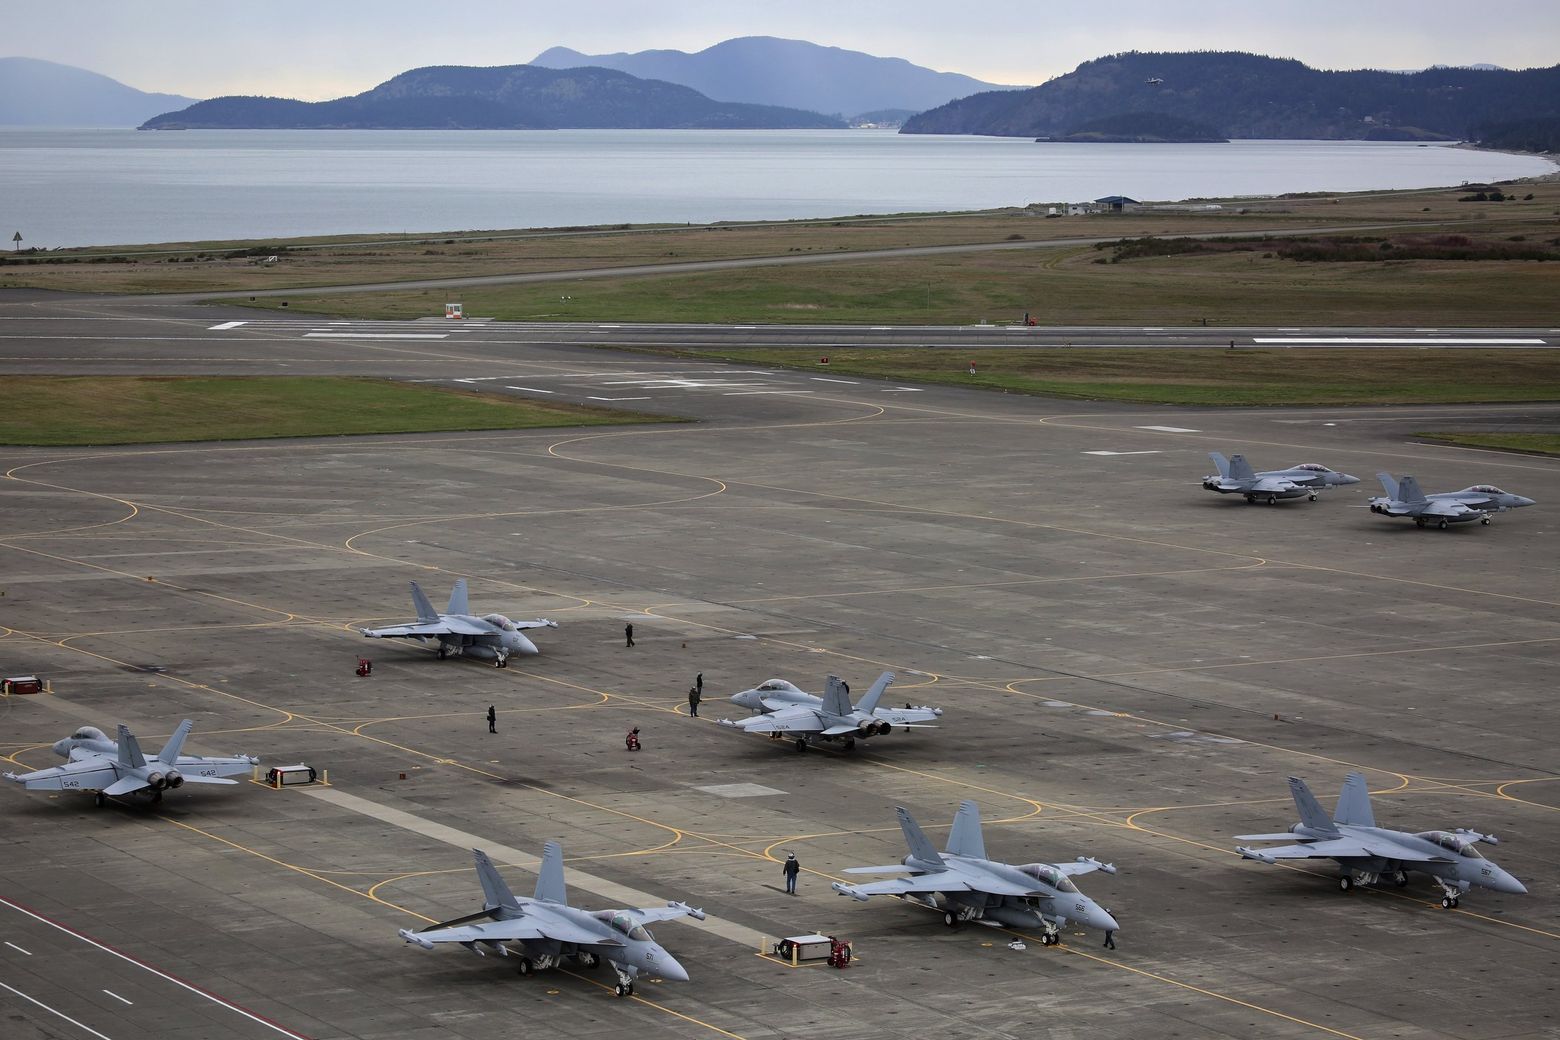 More public comment allowed on Growler jets at Whidbey